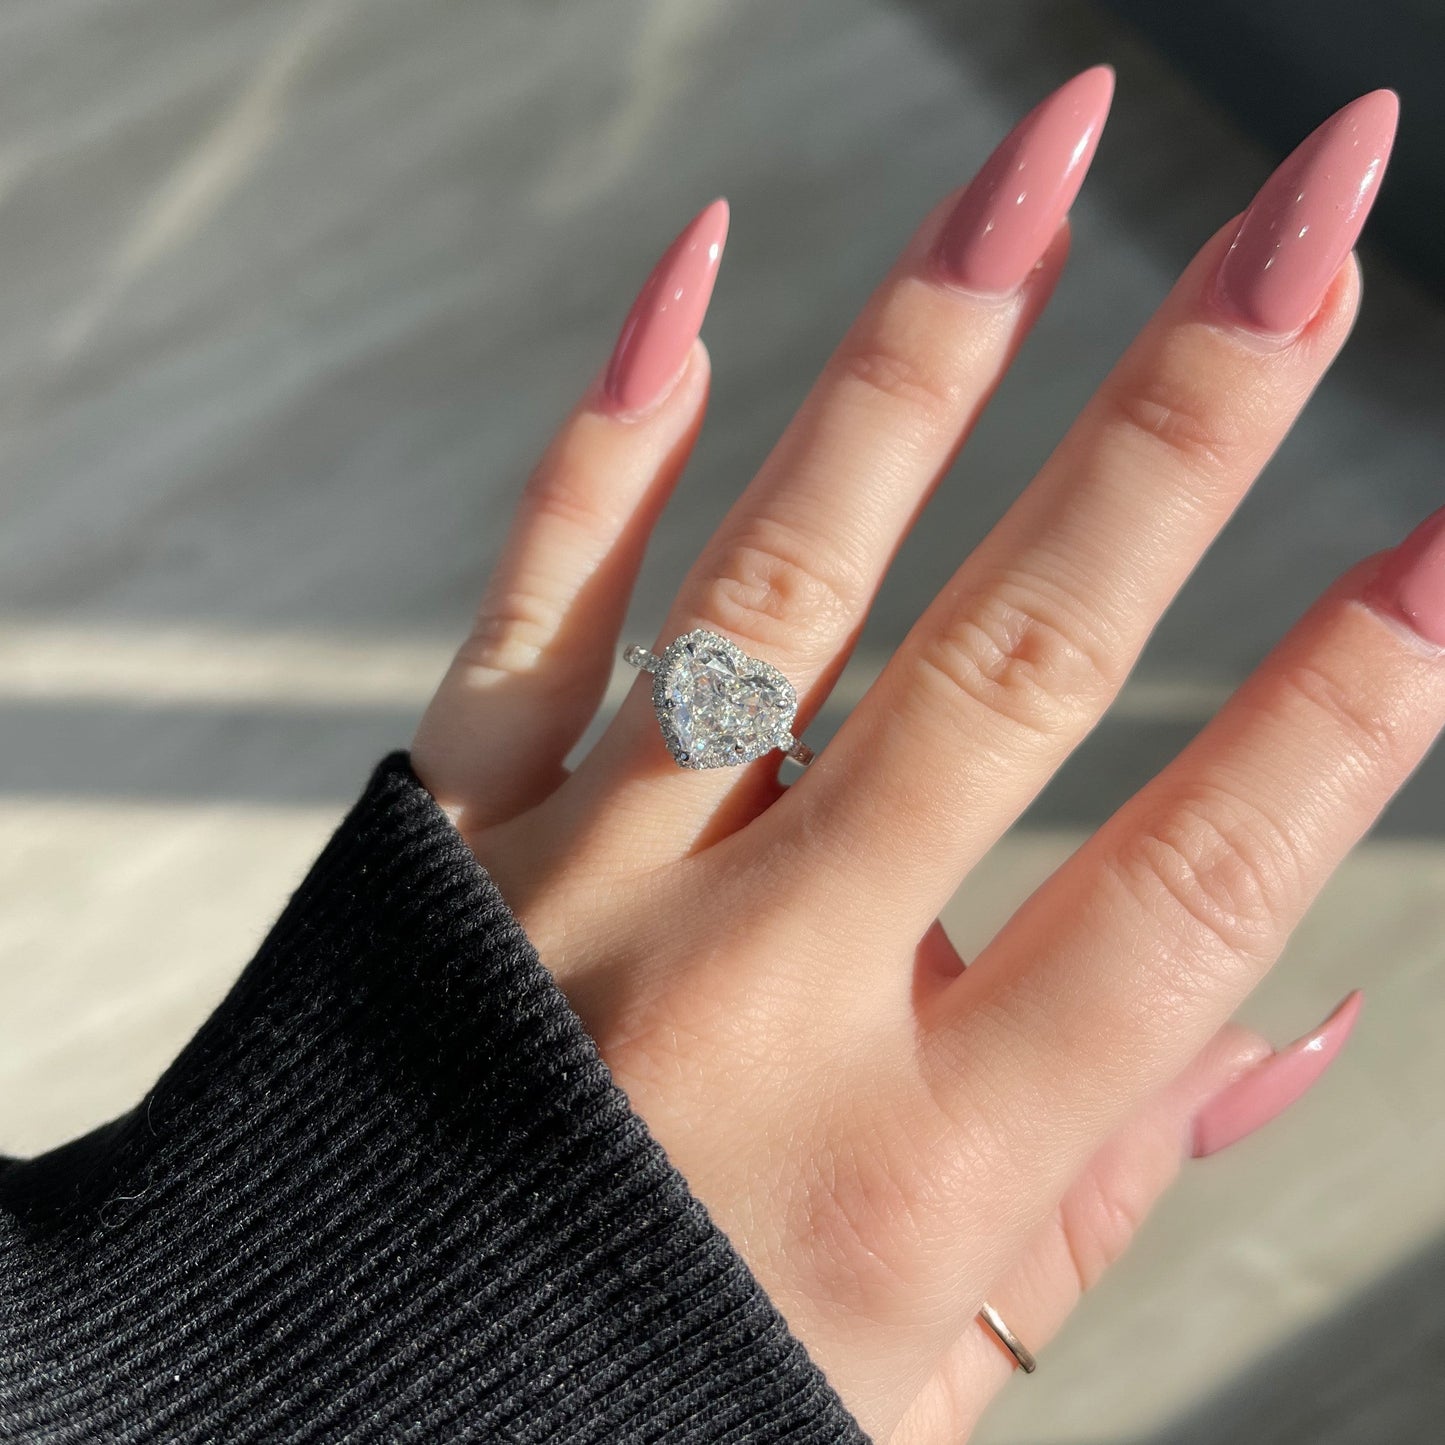 Hearts Ring Designs: 170+ Heart Ring Styles Online